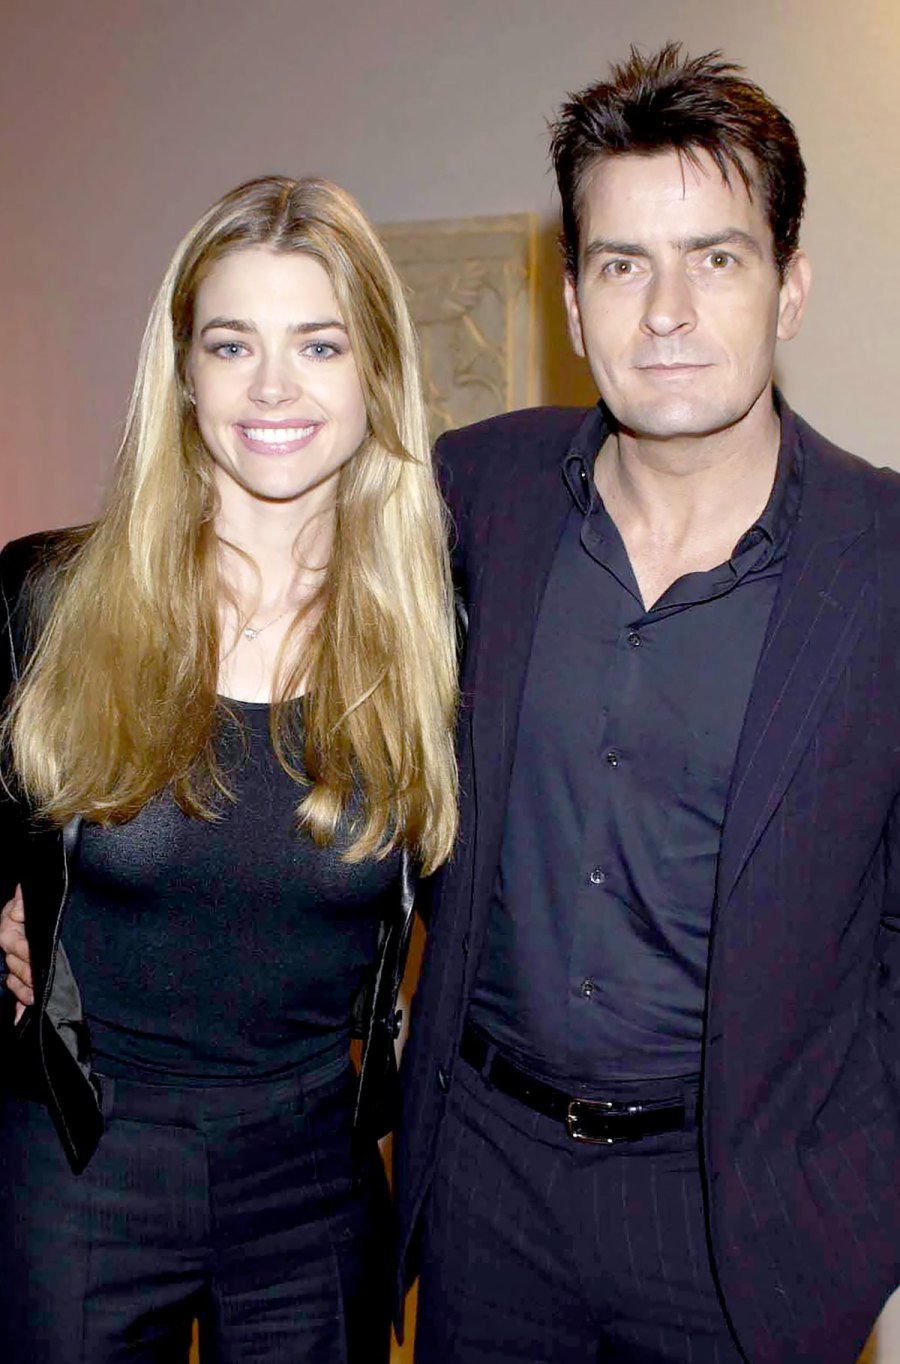 Denise Richards Doesn’t Want Daughters to Have Daddy Issues Like the Women Her Ex Charlie Sheen ‘Entertained’